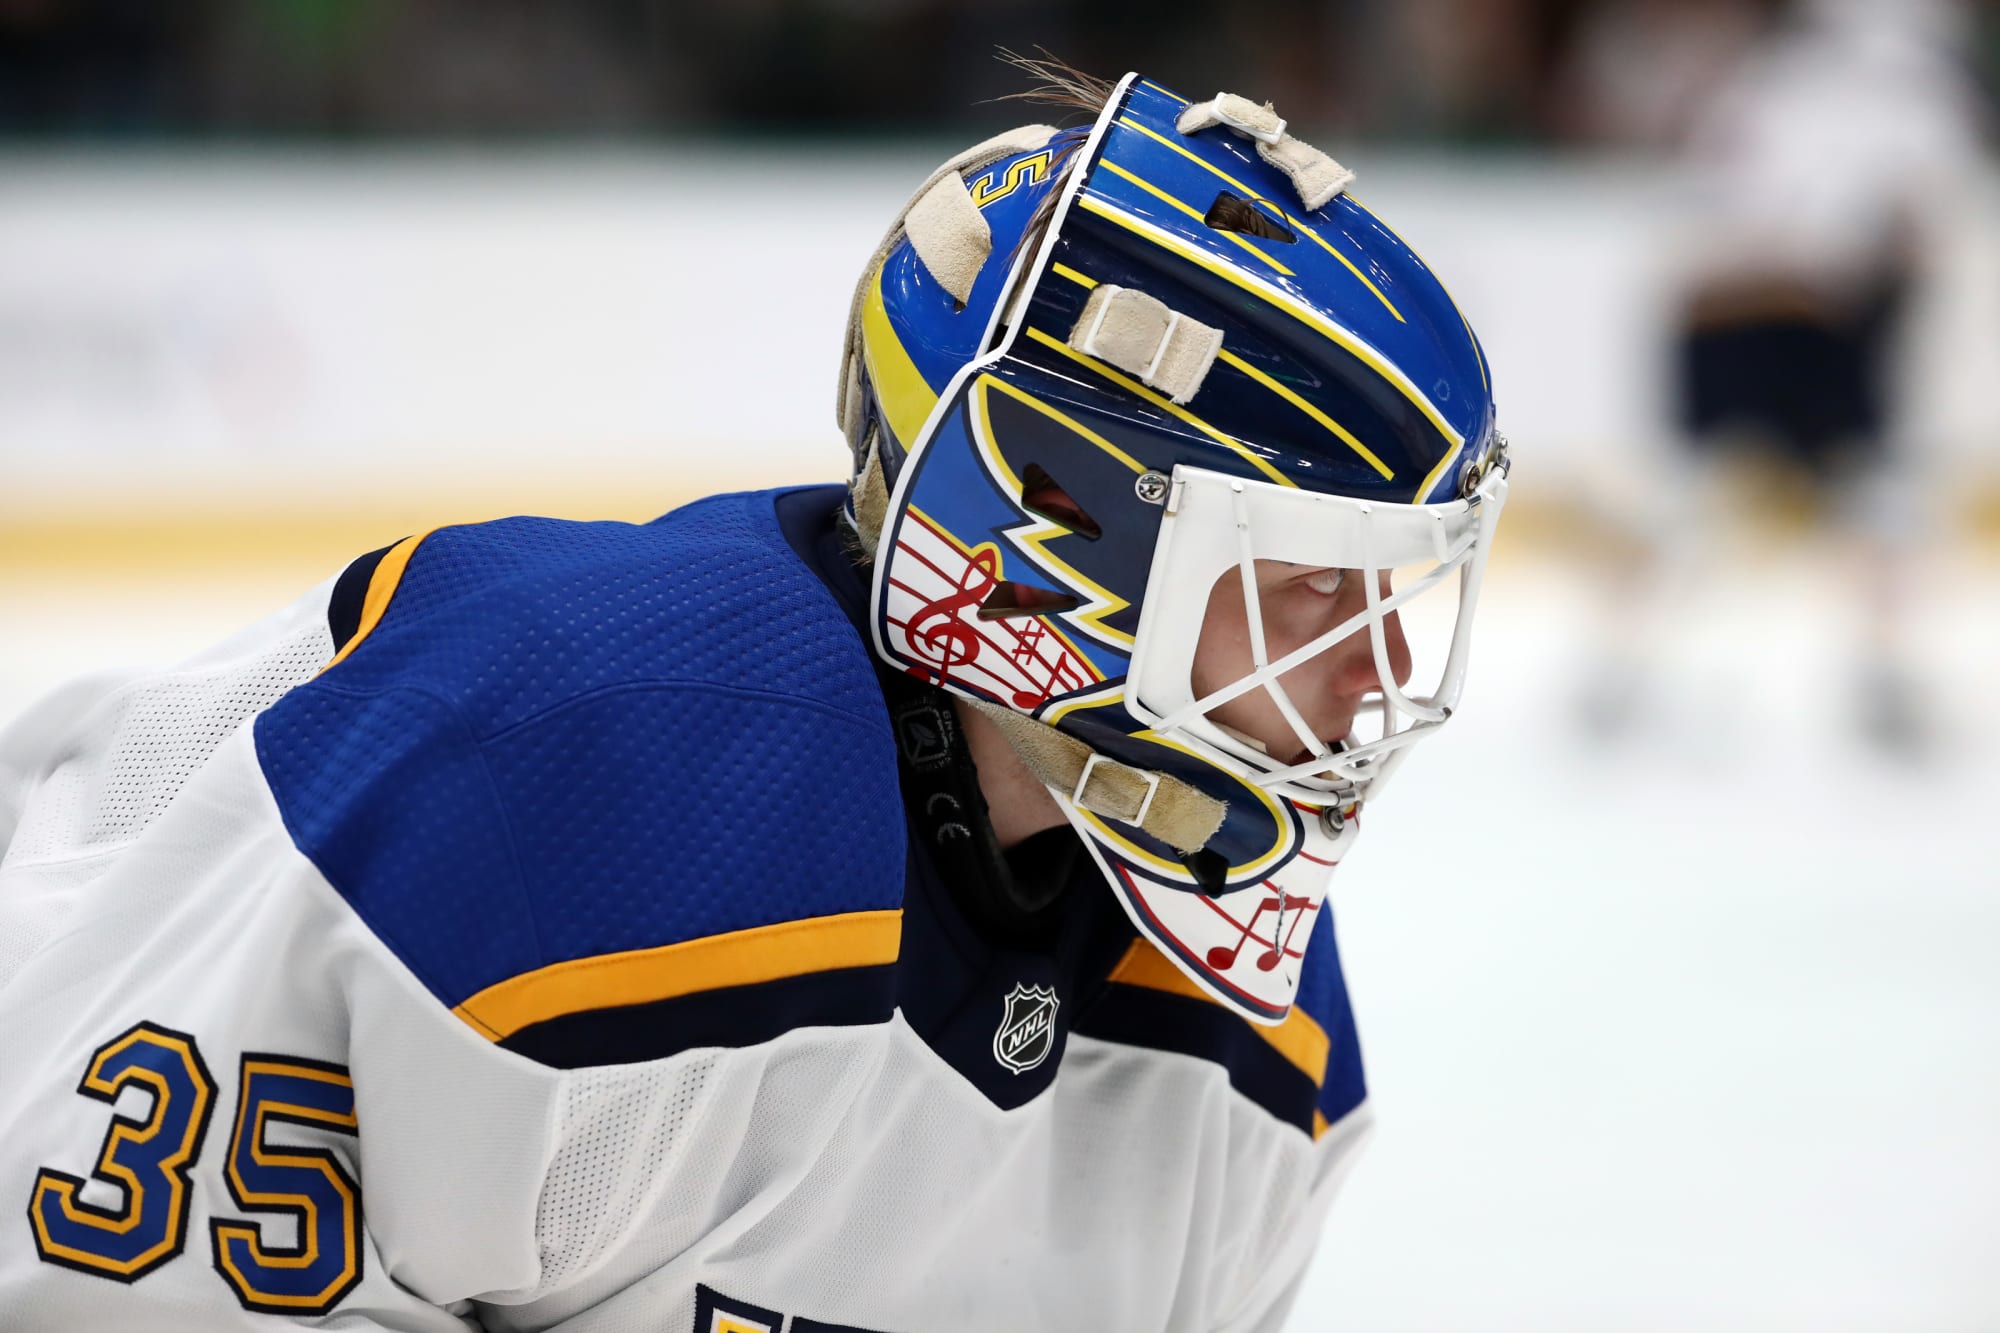 St. Louis Blues on X: Bona Hallikainen loves old-school goalie masks and  painted this one for @HussoVille this season. The design was modeled after  a mask worn by former Blue Pat Jablonski